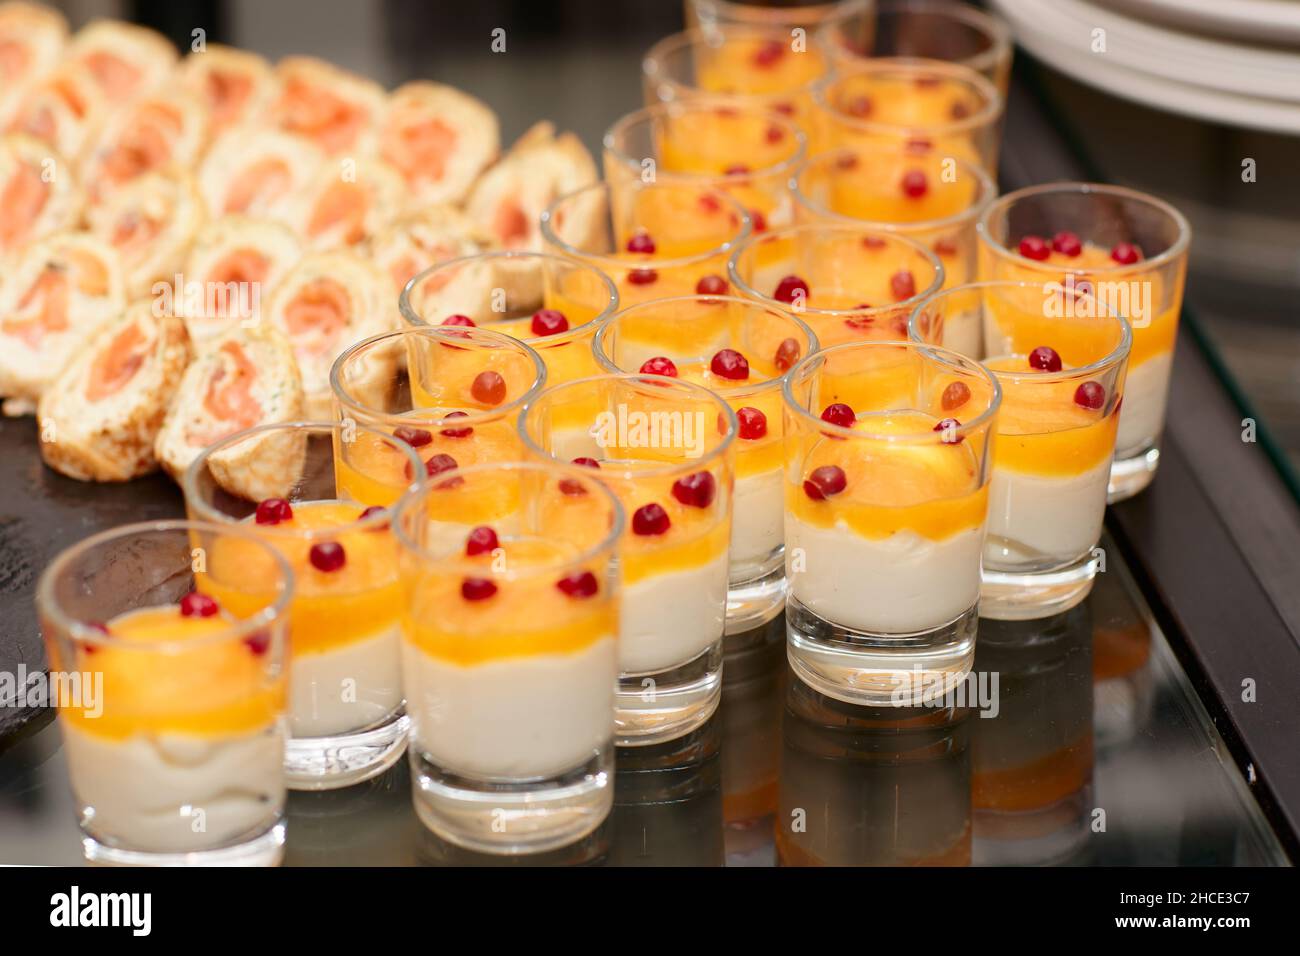 Glasses of panna cotta and pancake rolls with salmon on banquet table Stock Photo